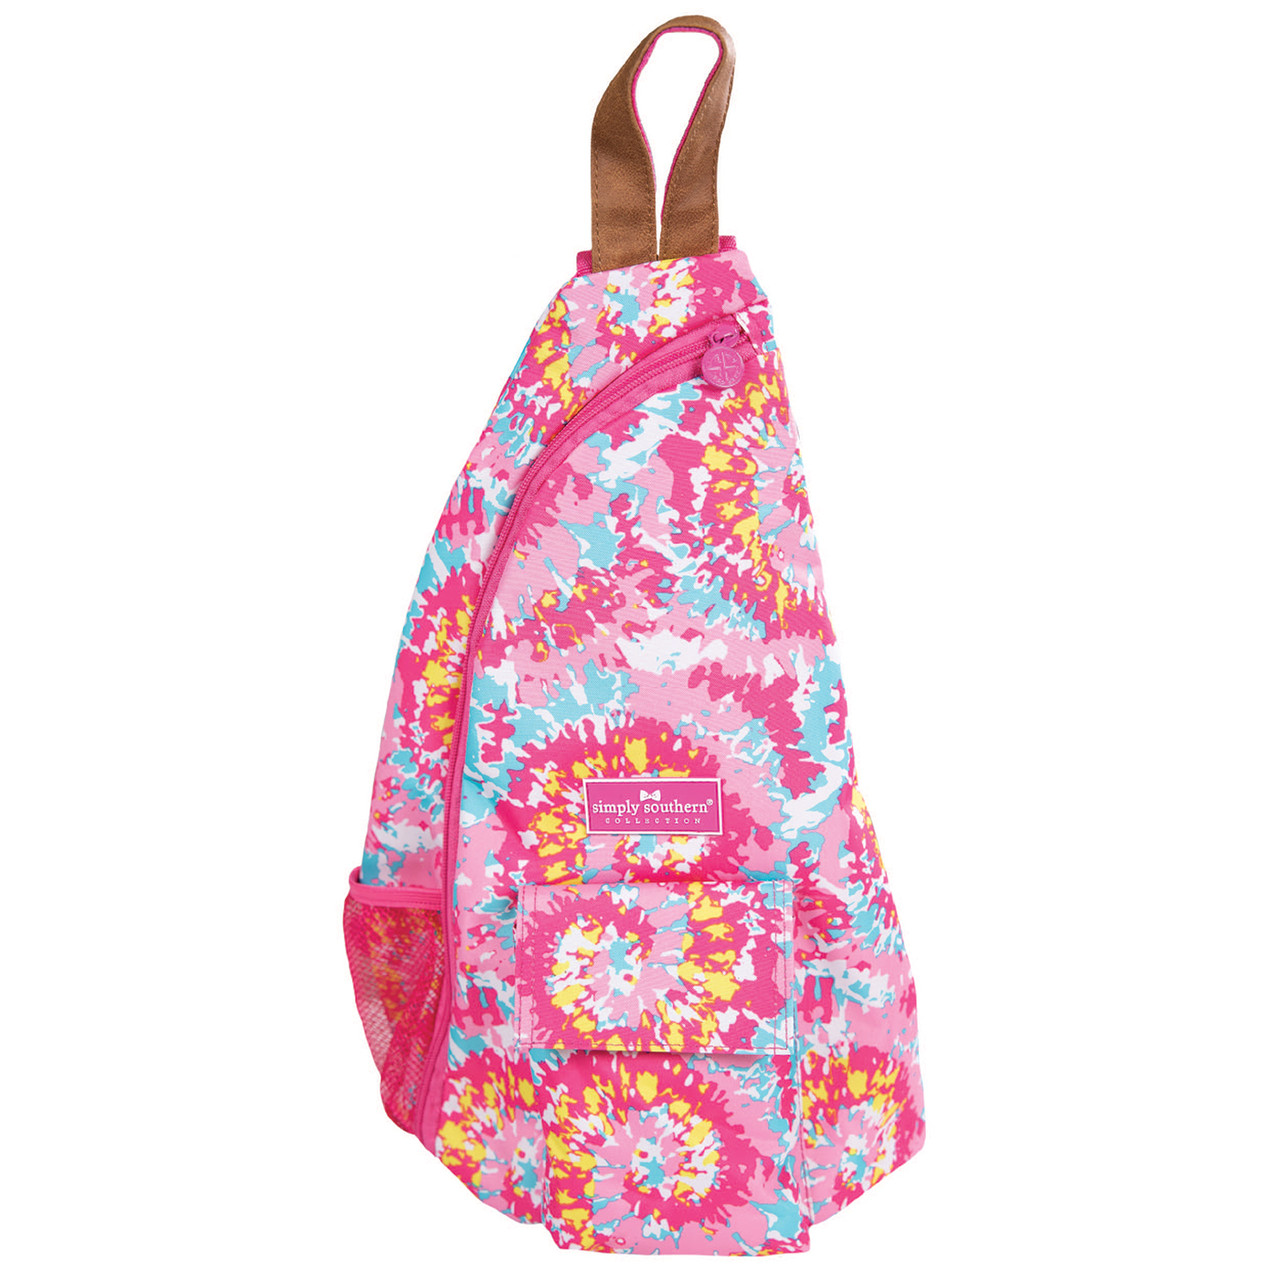 Simply Southern Tiedye Sling Backpack by Simply Southern|The Lamp Stand